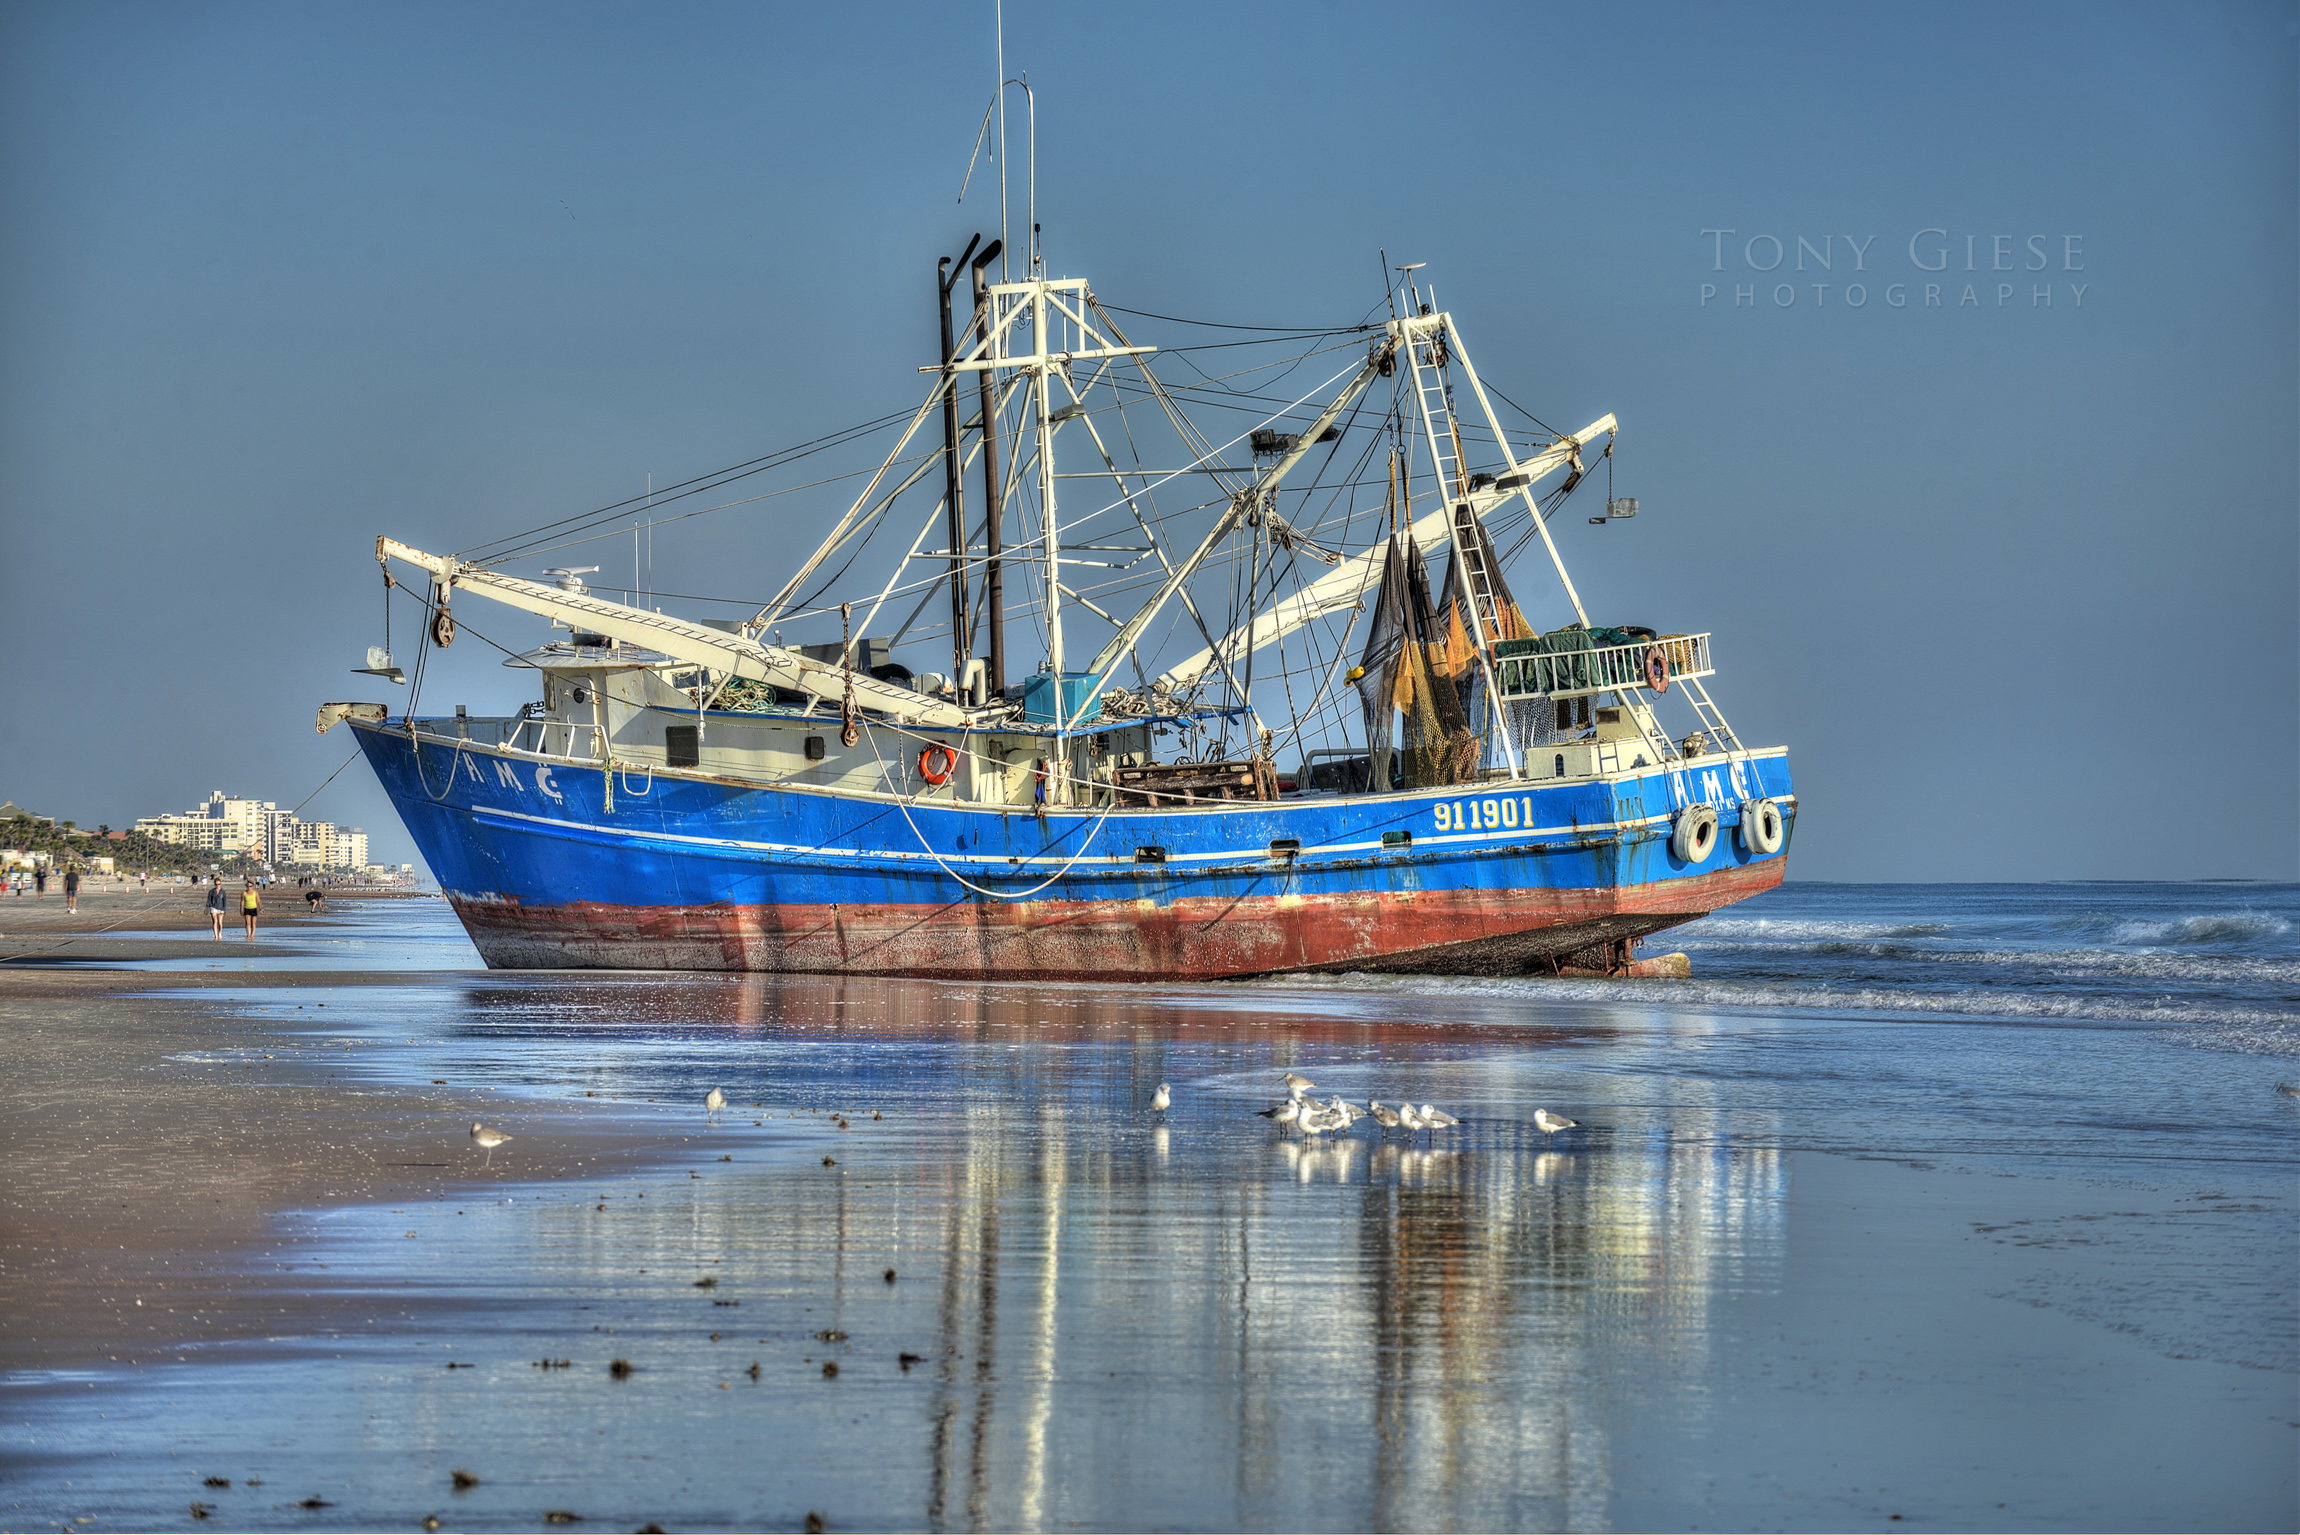 A shrimp boat ran aground in Ormond Beach for almost two weeks before a barge pulled it back out to sea. Interesting beach attraction for tourist and all local residents as it rested on the shoreline.